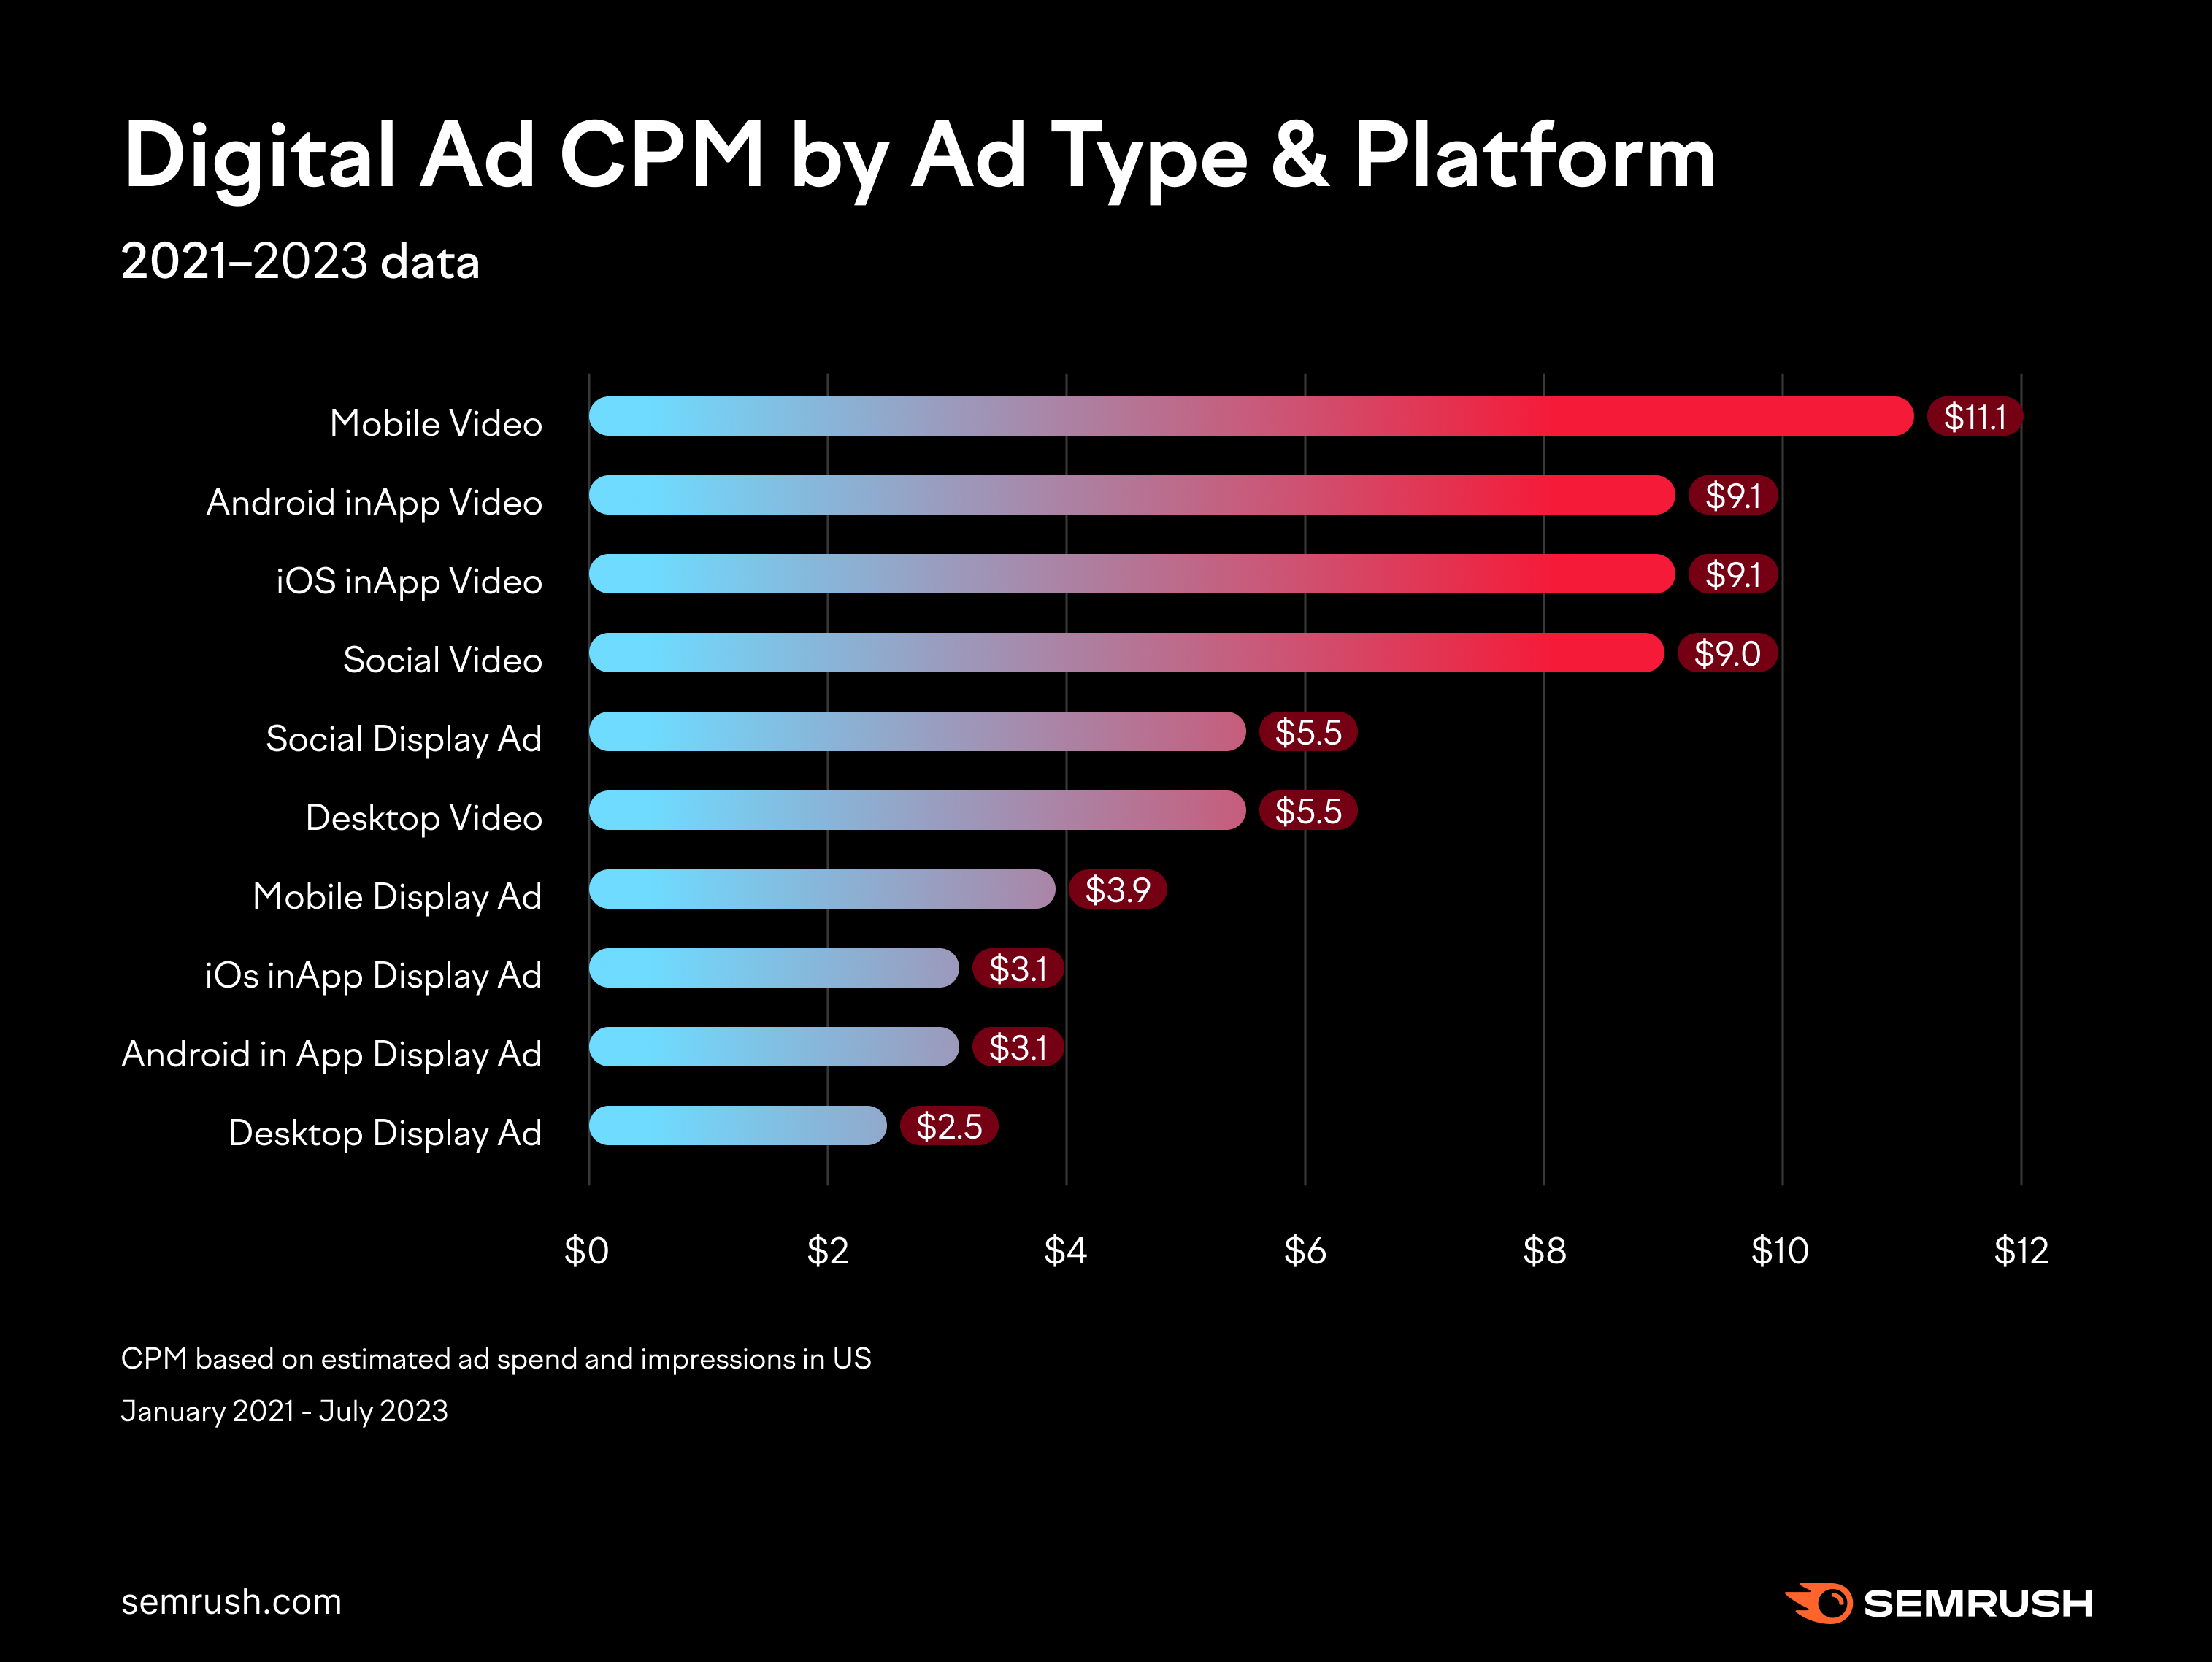 How much is the average CPM of ? What about for various